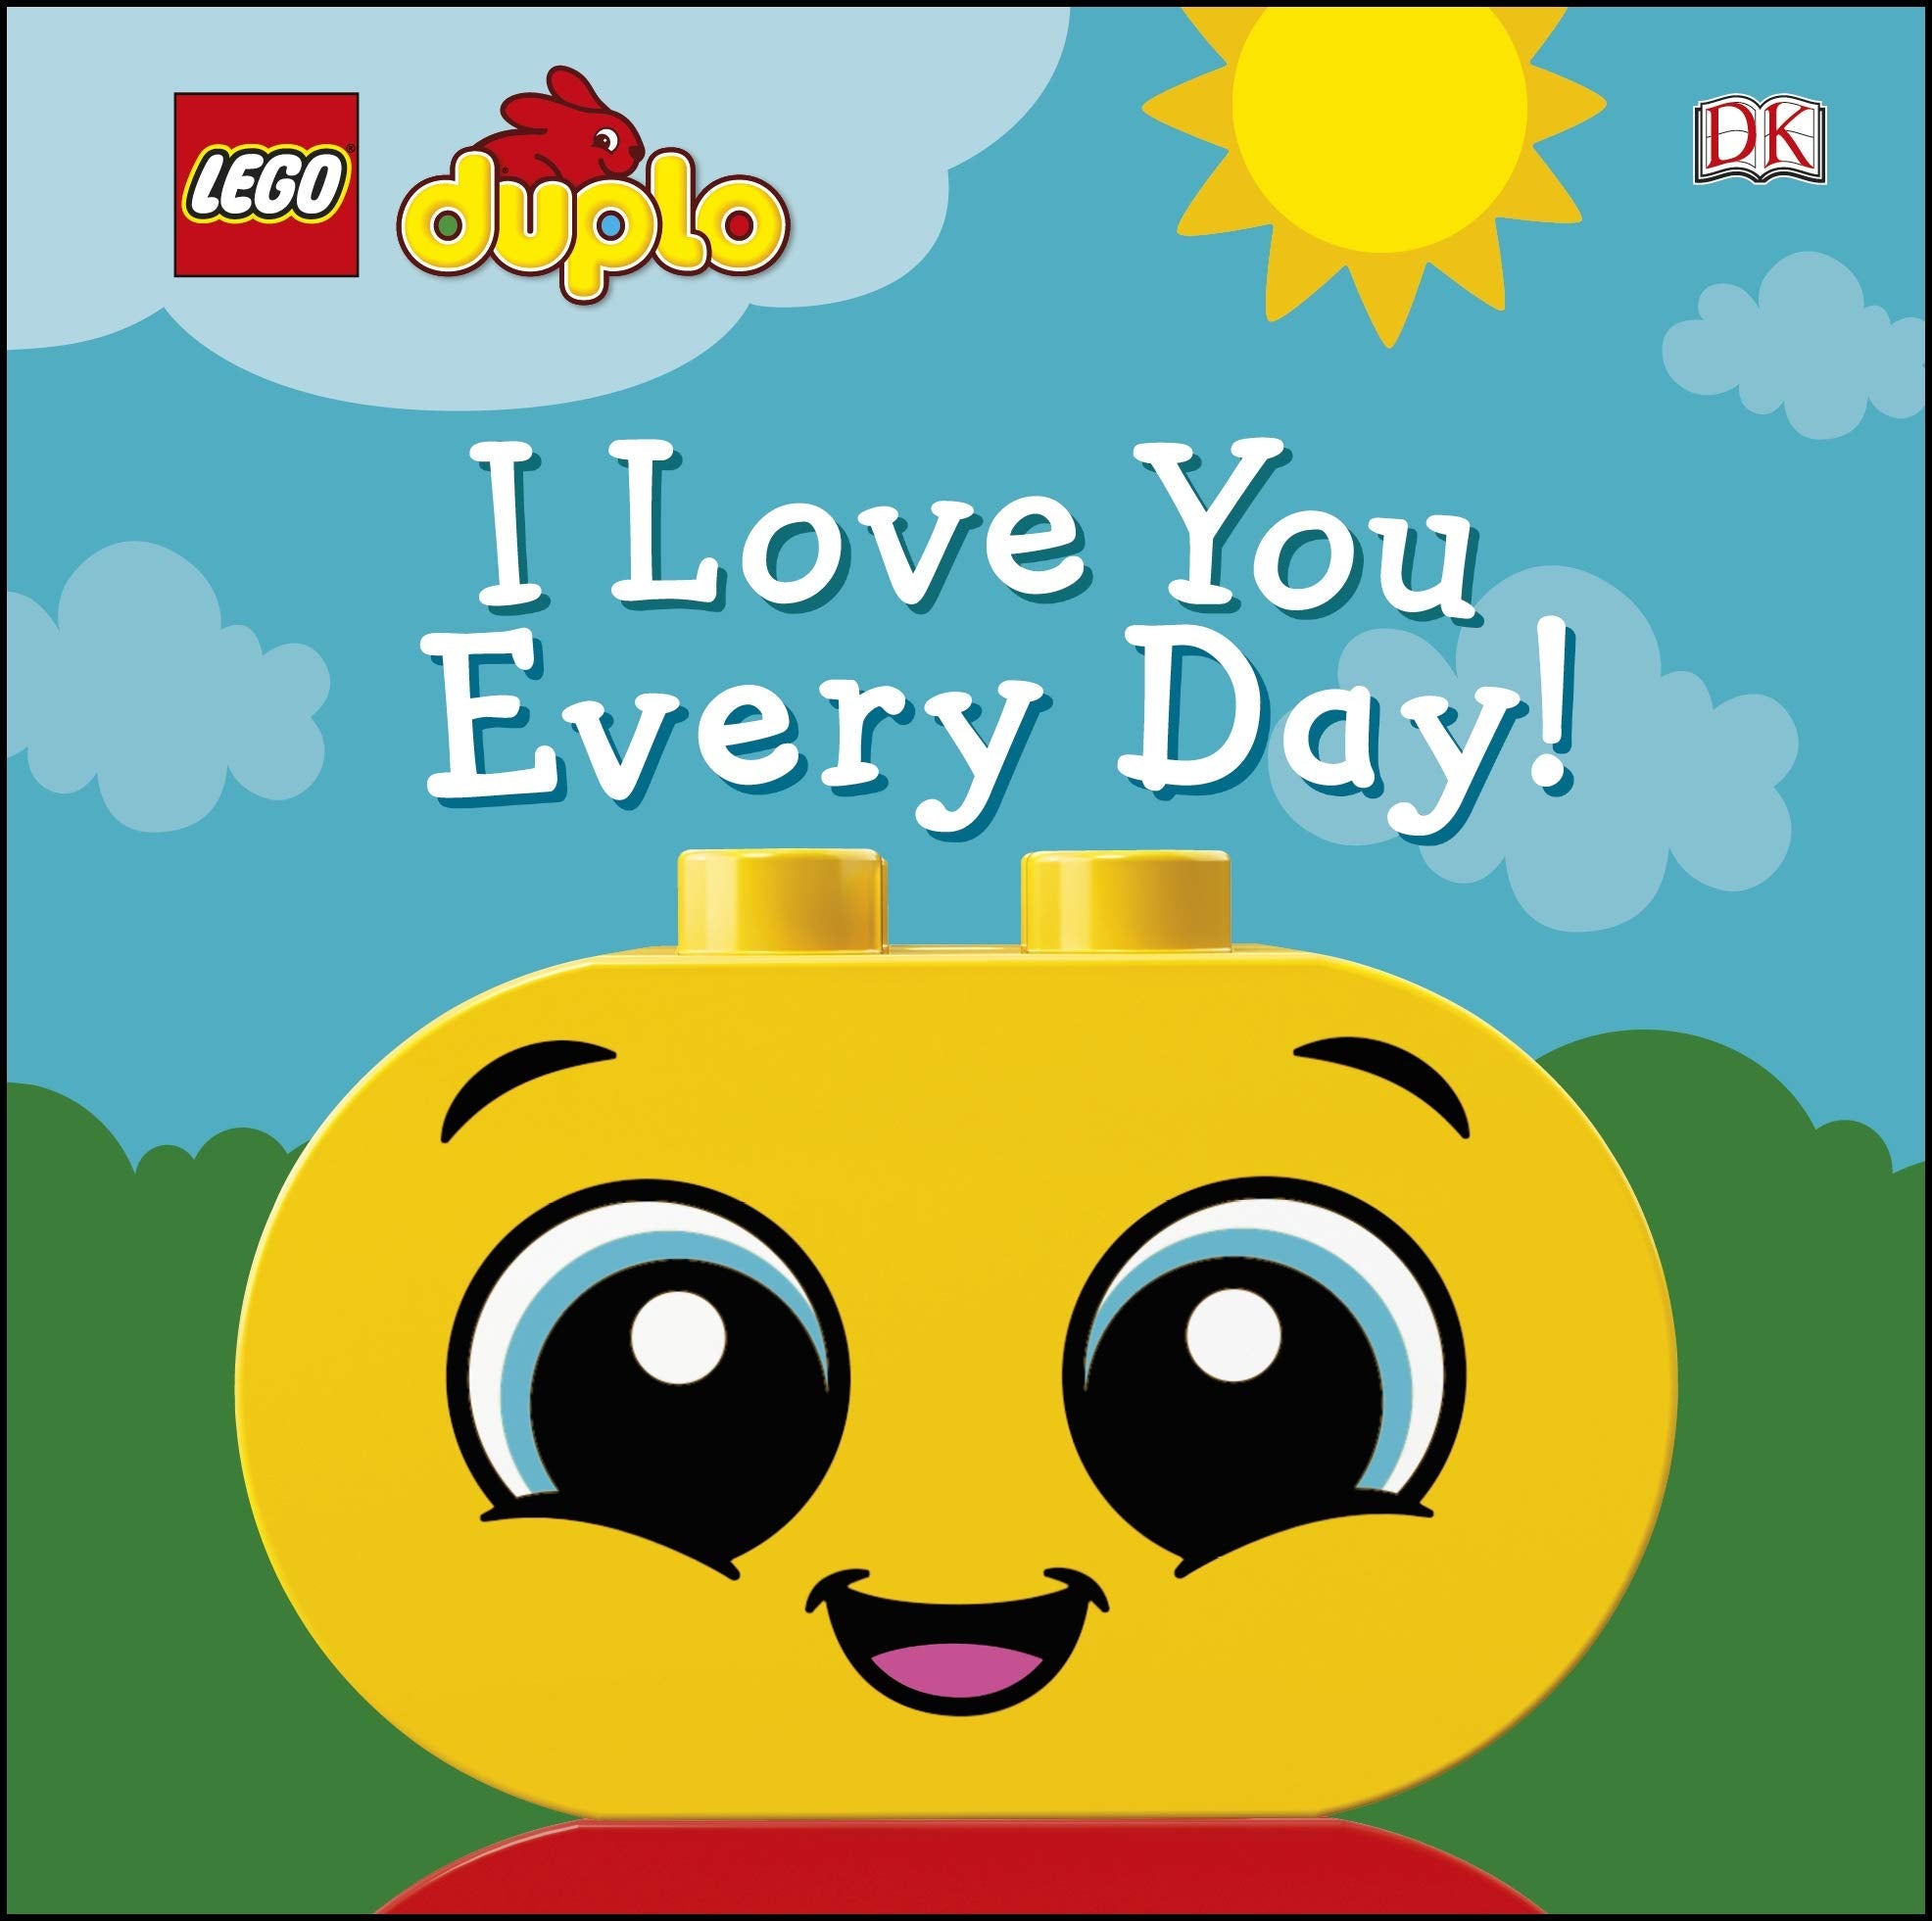 LEGO DUPLO I Love You Every Day! - Board Book